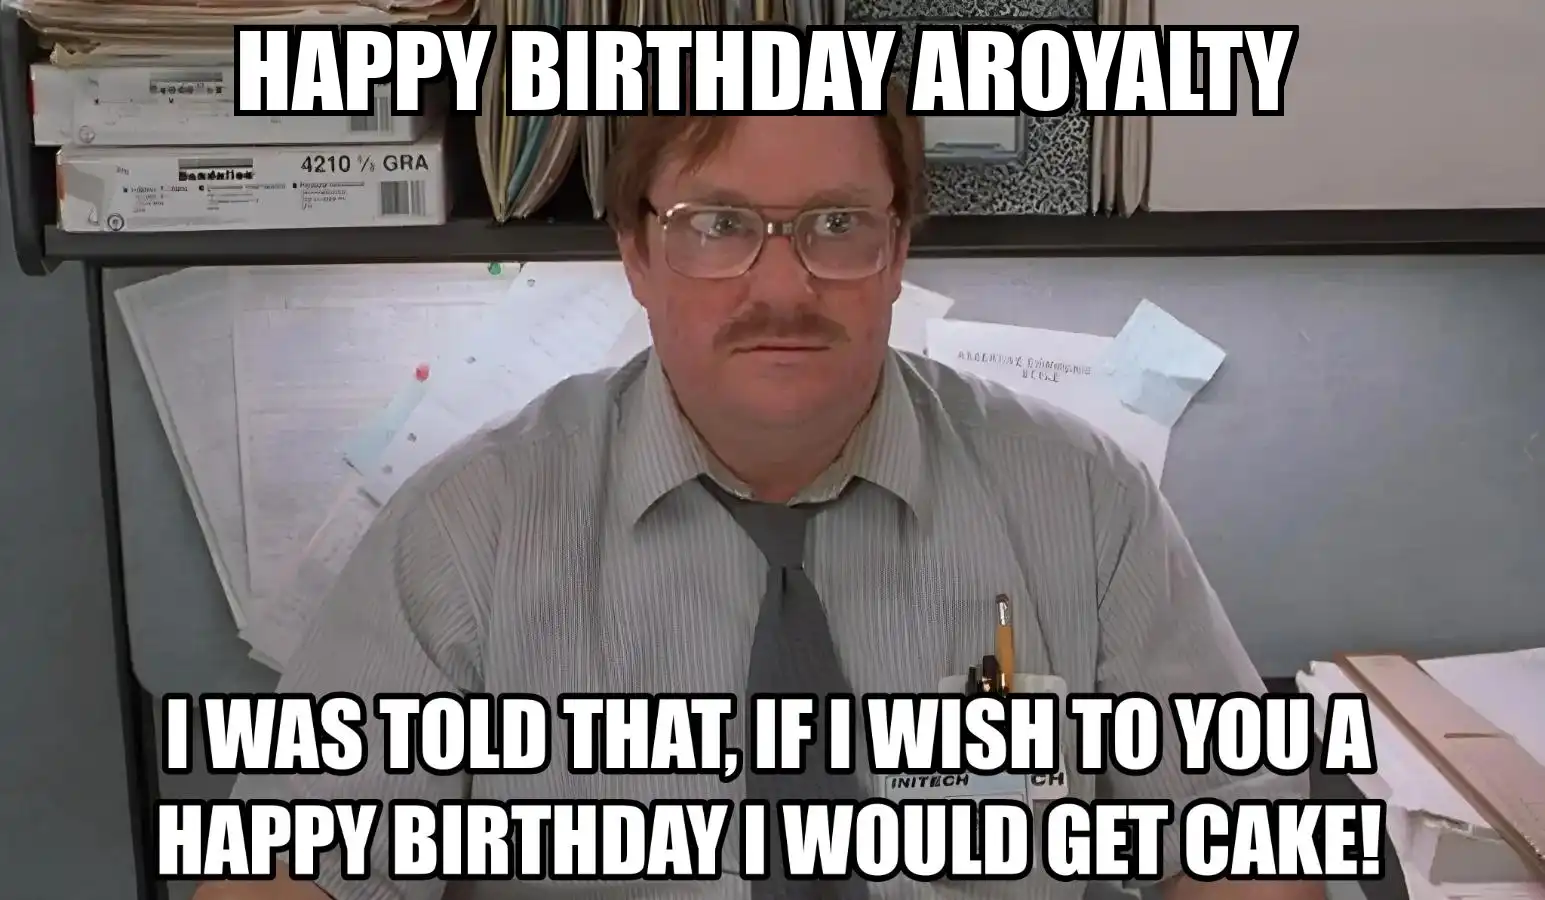 Happy Birthday Aroyalty I Would Get A Cake Meme